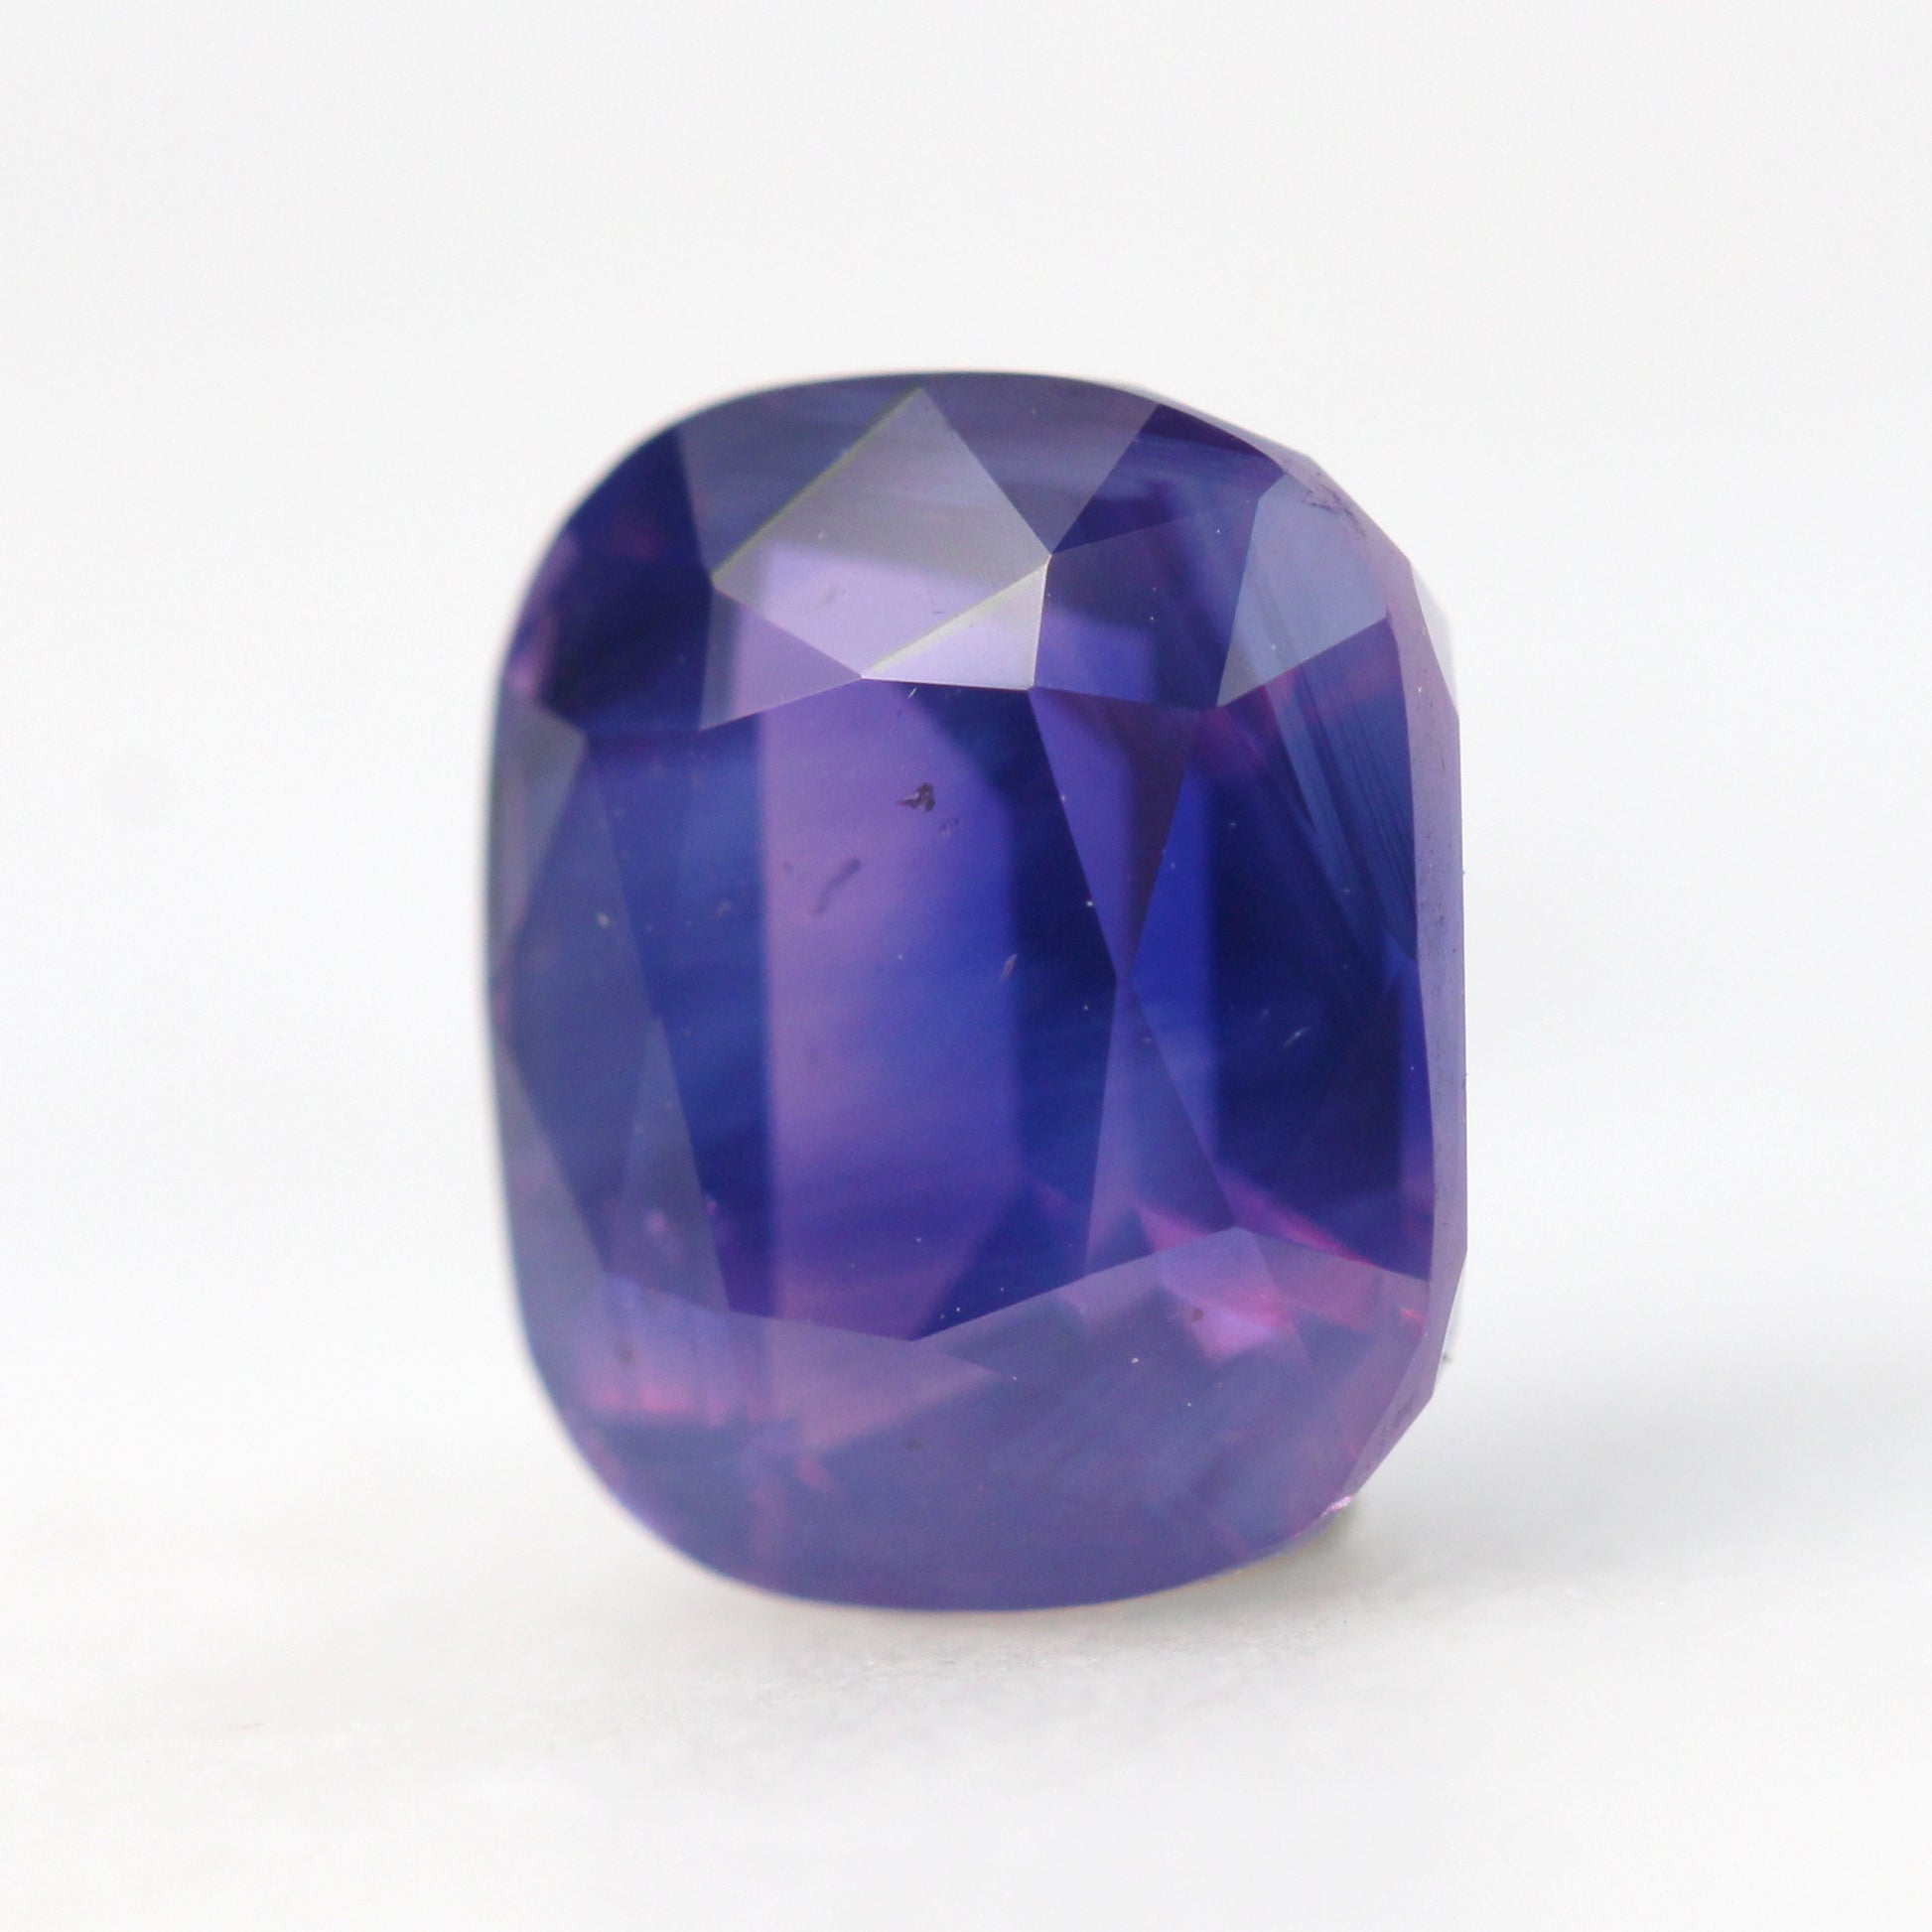 3.07 Carat Bicolor Purple Pink Cushion Cut Sapphire for Custom Work - Inventory Code PPC307 - Midwinter Co. Alternative Bridal Rings and Modern Fine Jewelry